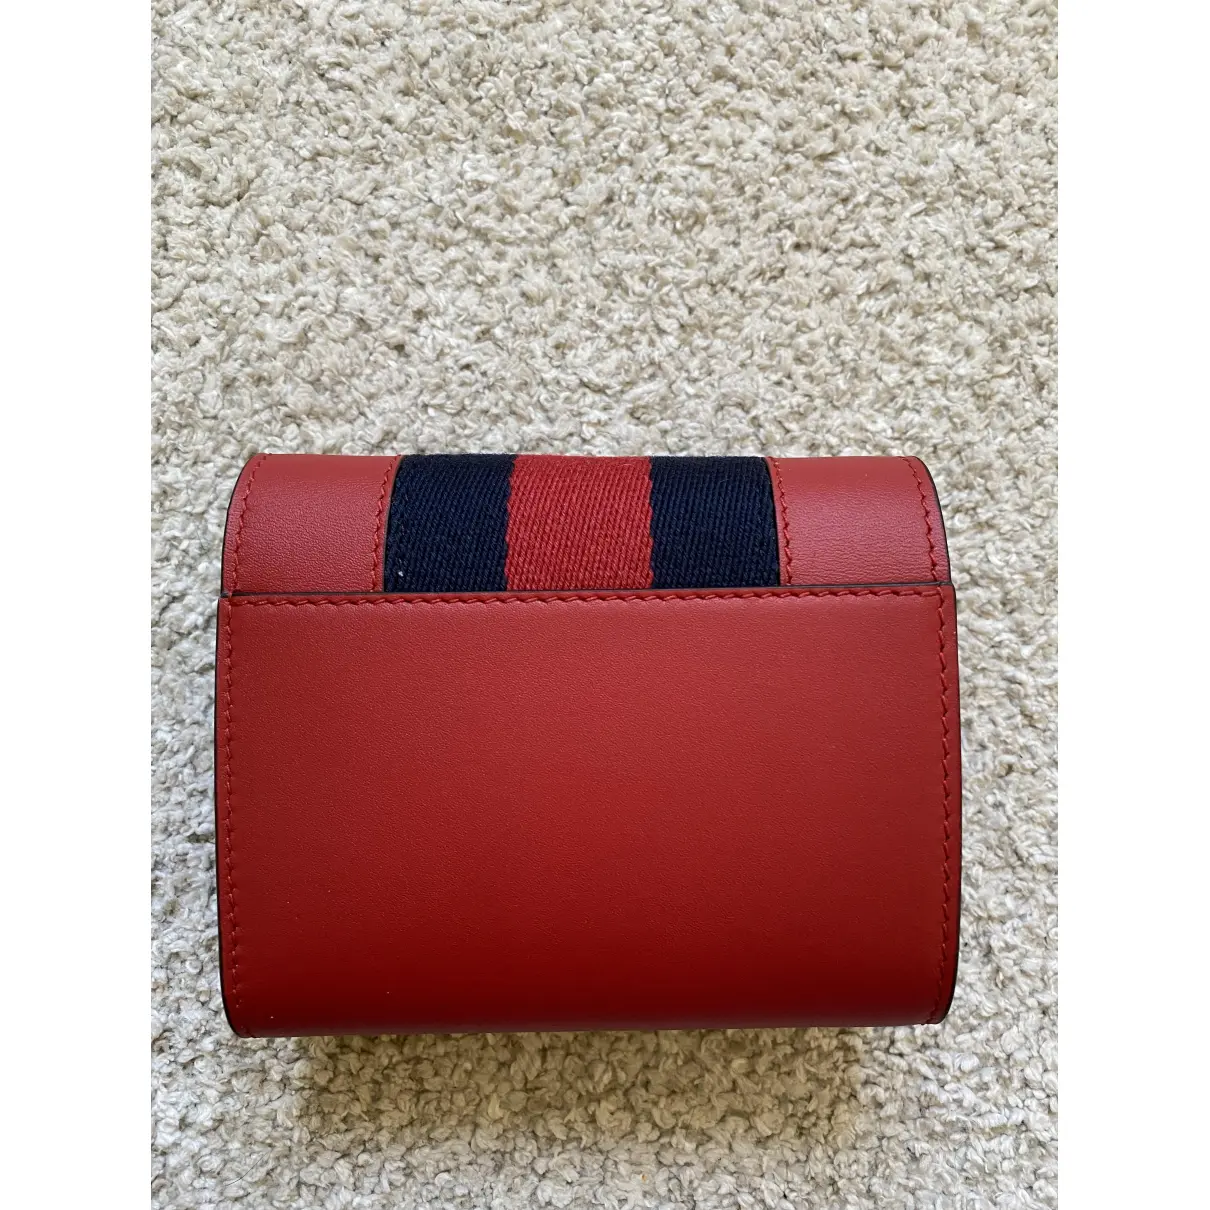 Buy Gucci Sylvie leather wallet online